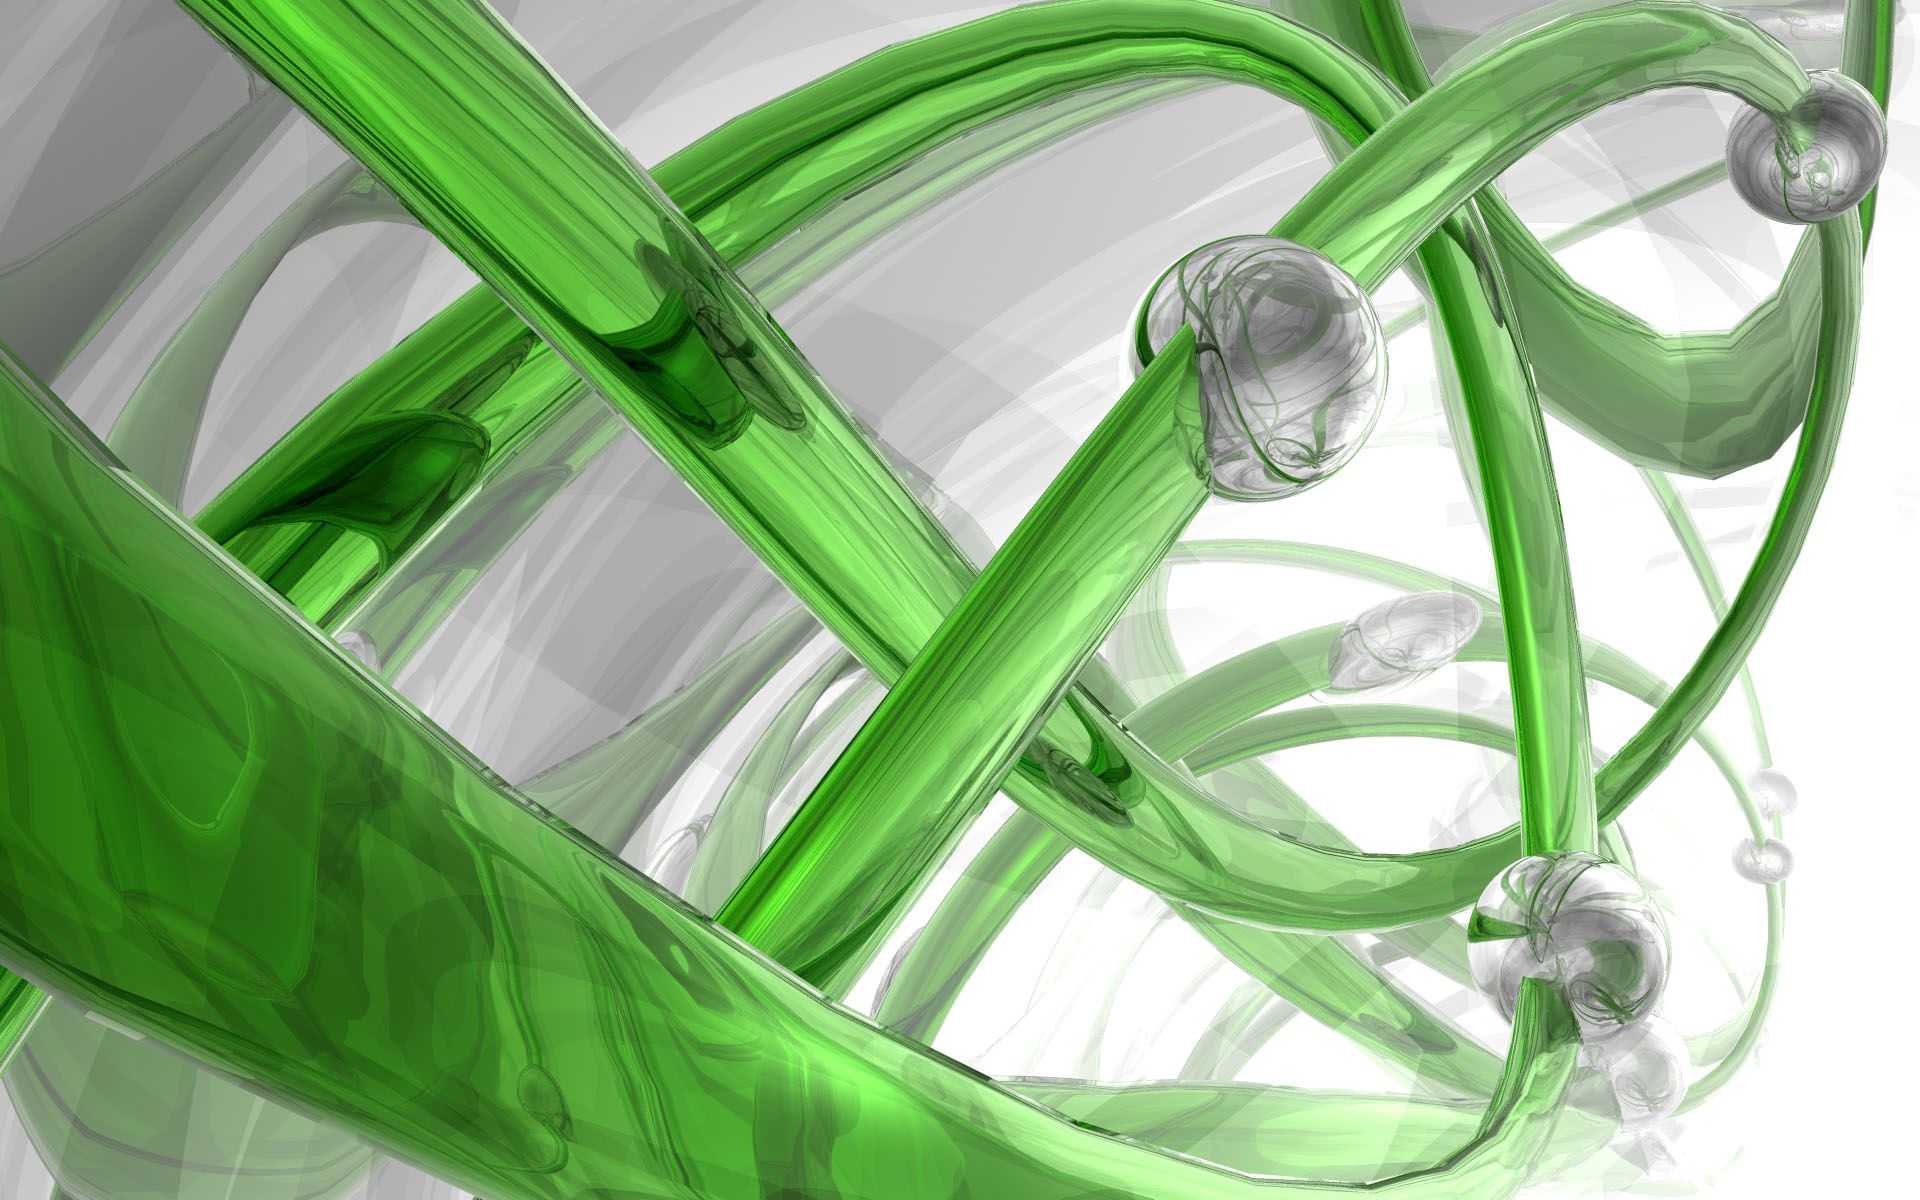 55433 2560x1080 PC pictures for free, download white, spiral, green, glass 2560x1080 wallpapers on your desktop